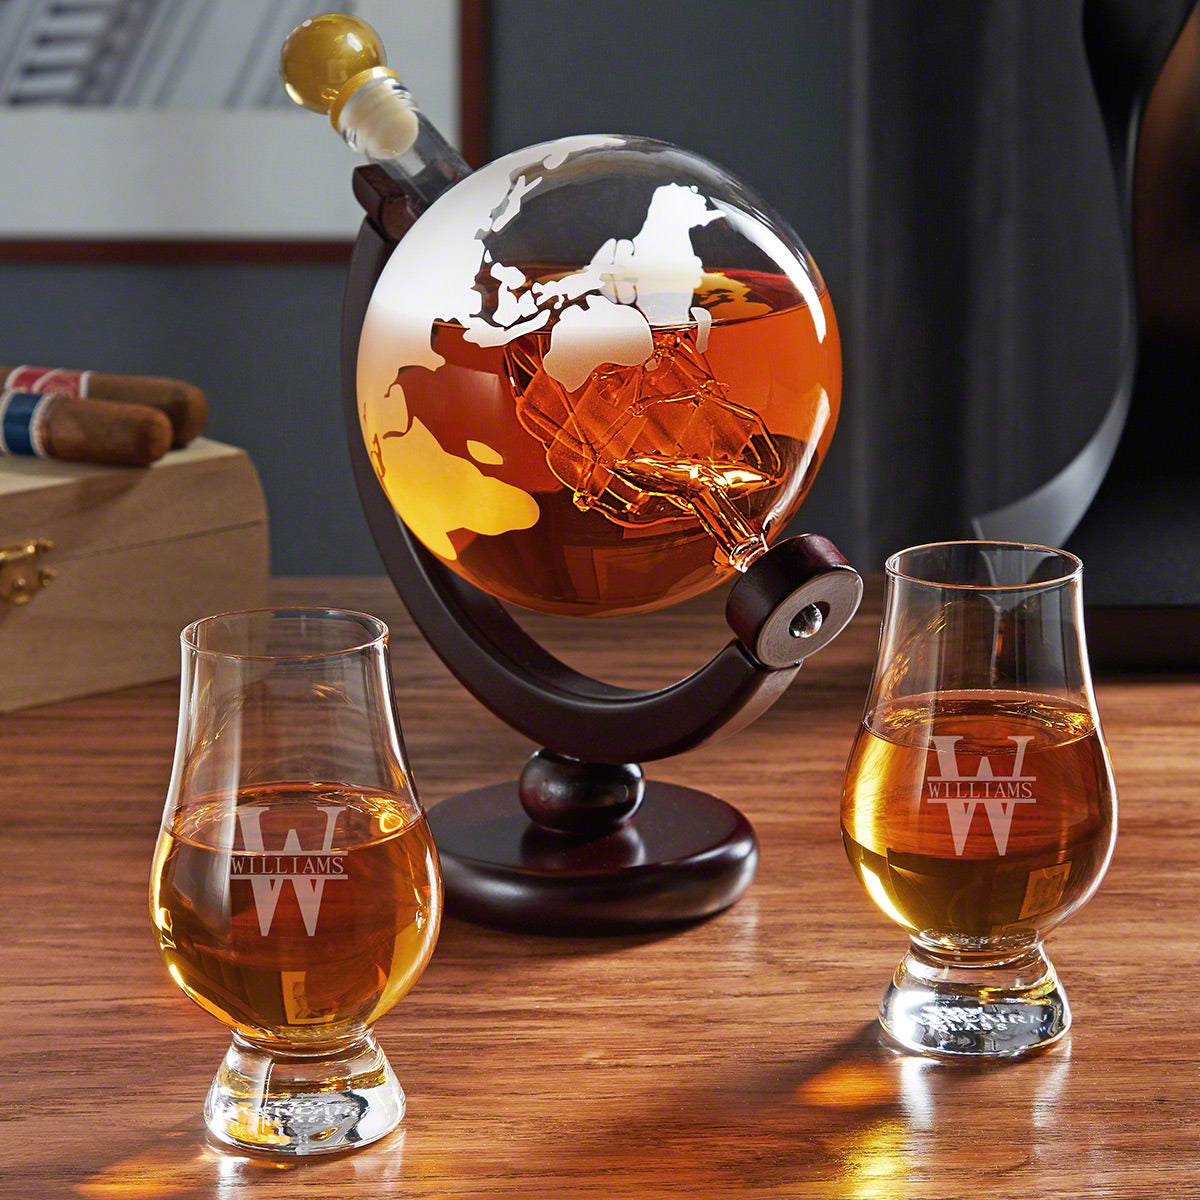 Personalized Globe Decanter Set with Glencairn Glasses